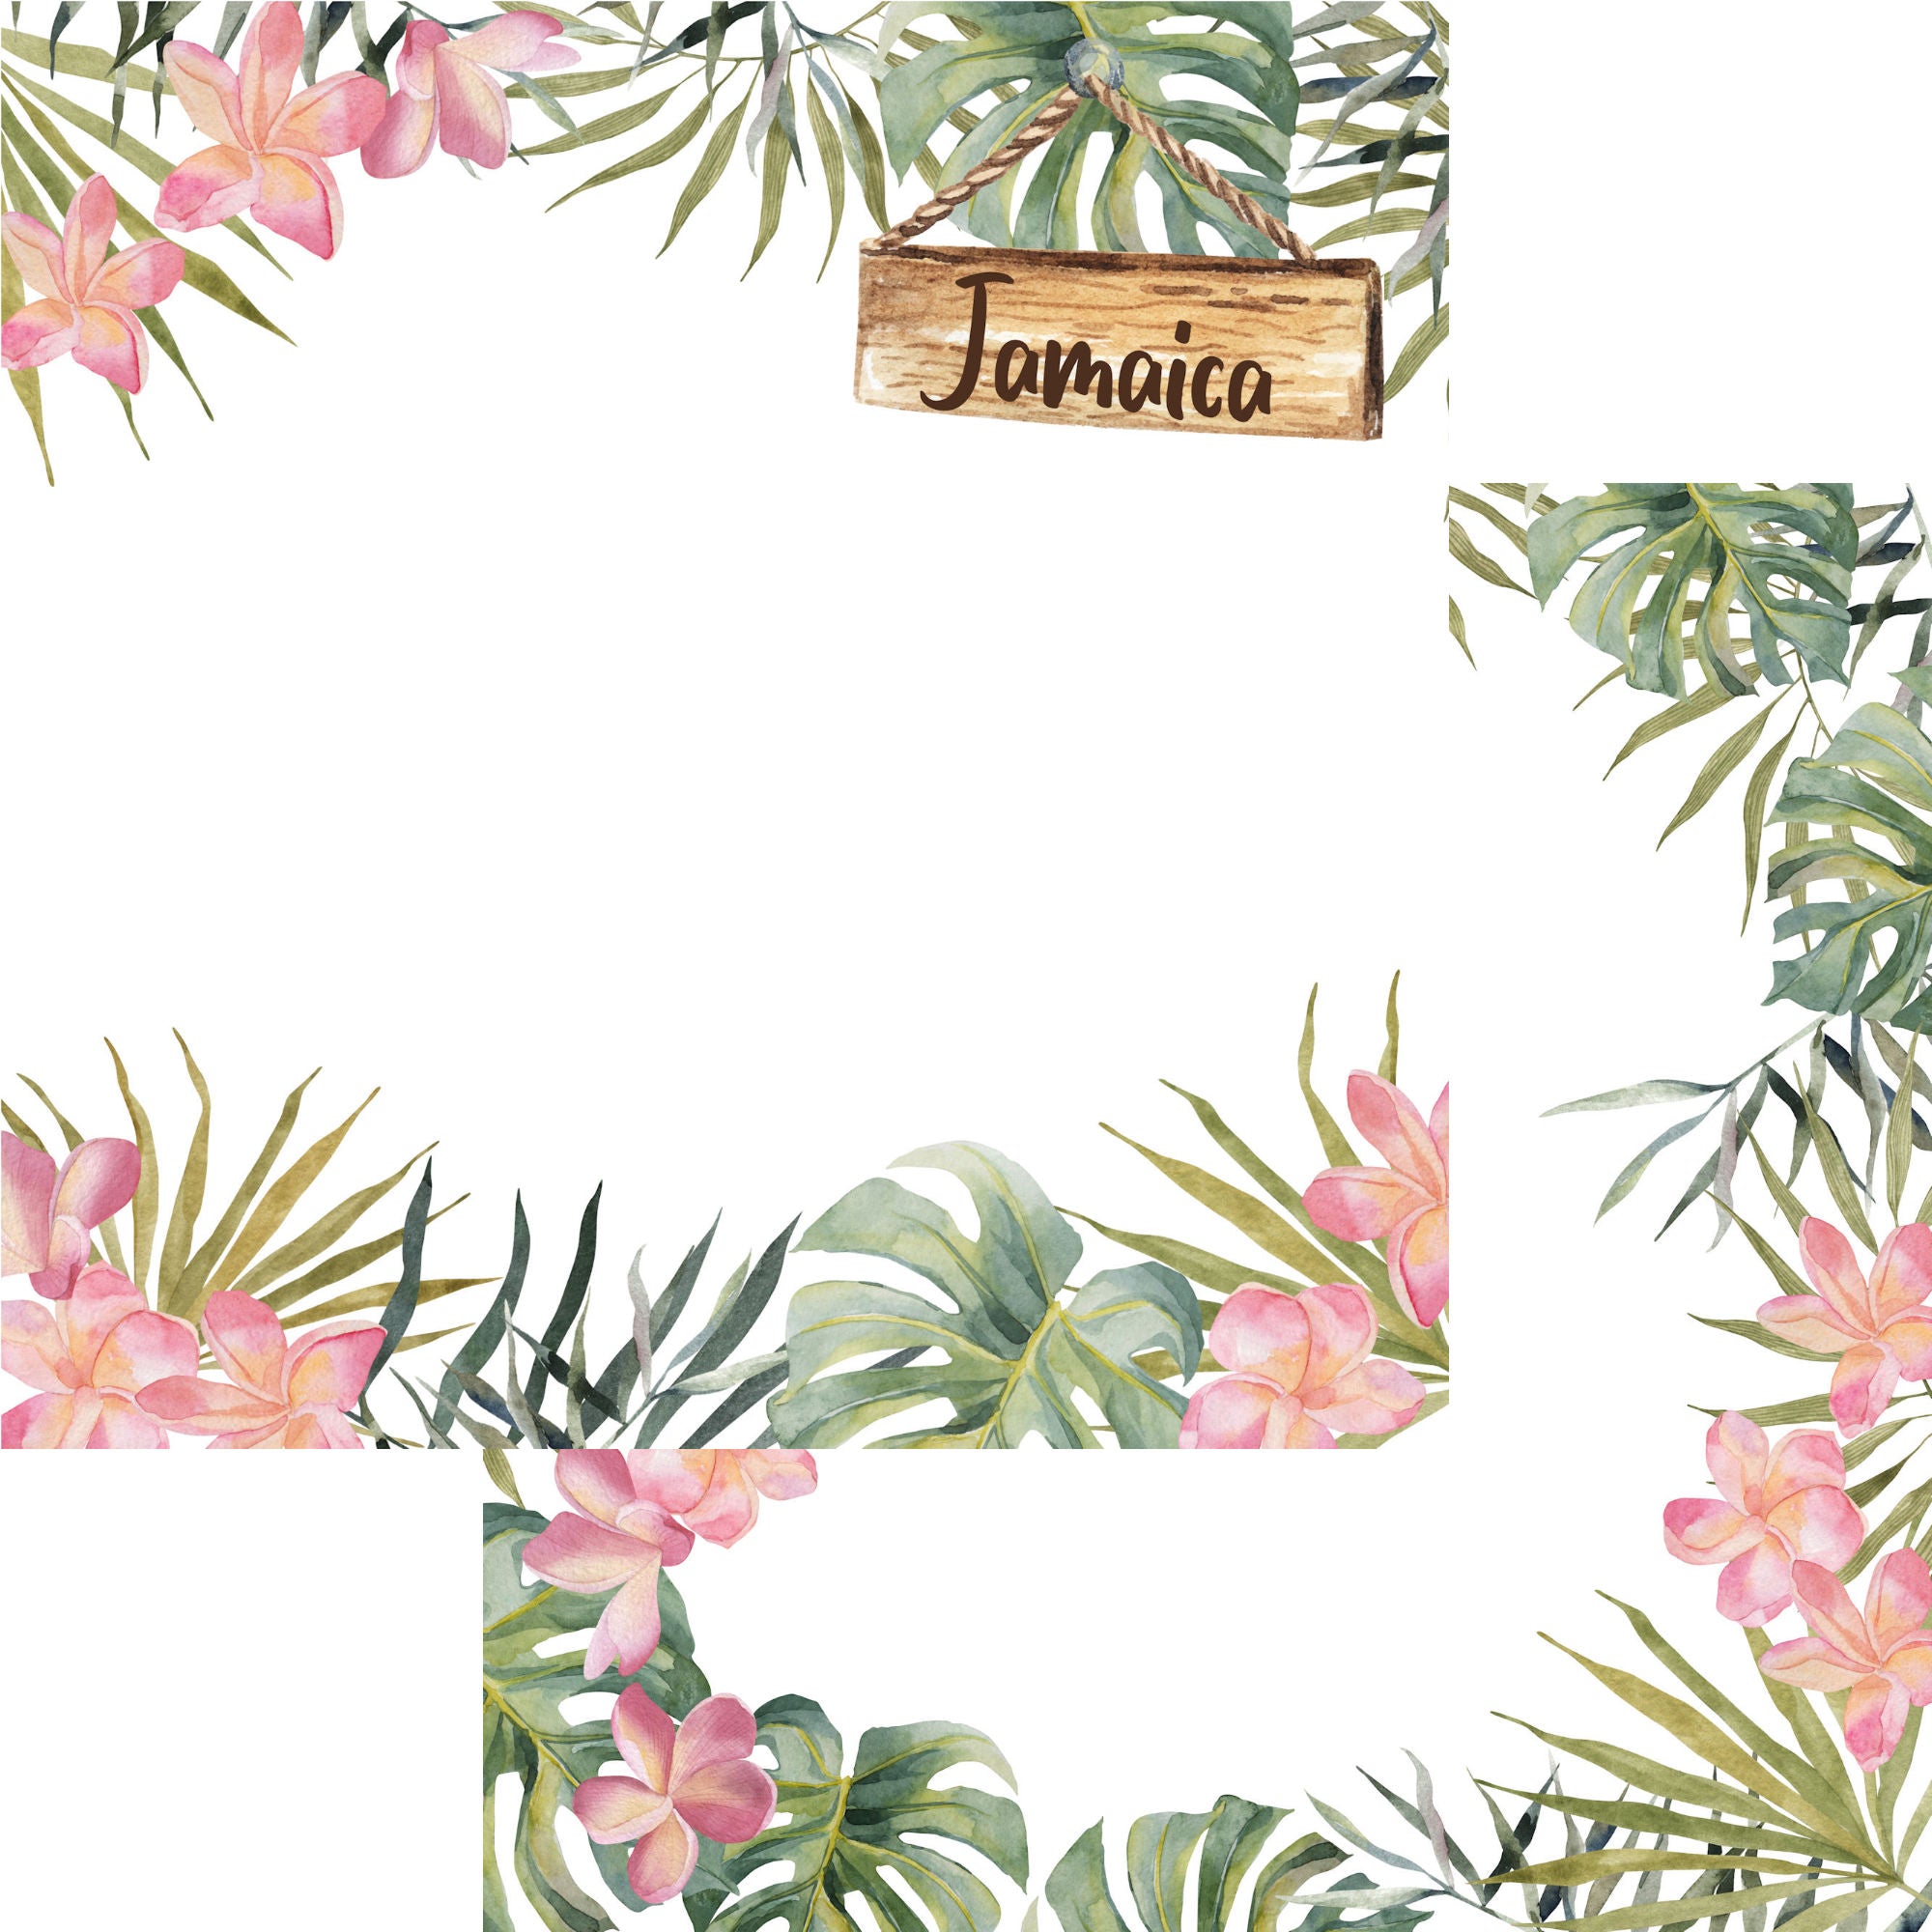 Tropical Paradise Collection Jamaica 12 x 12 Double-Sided Scrapbook Paper by SSC Designs